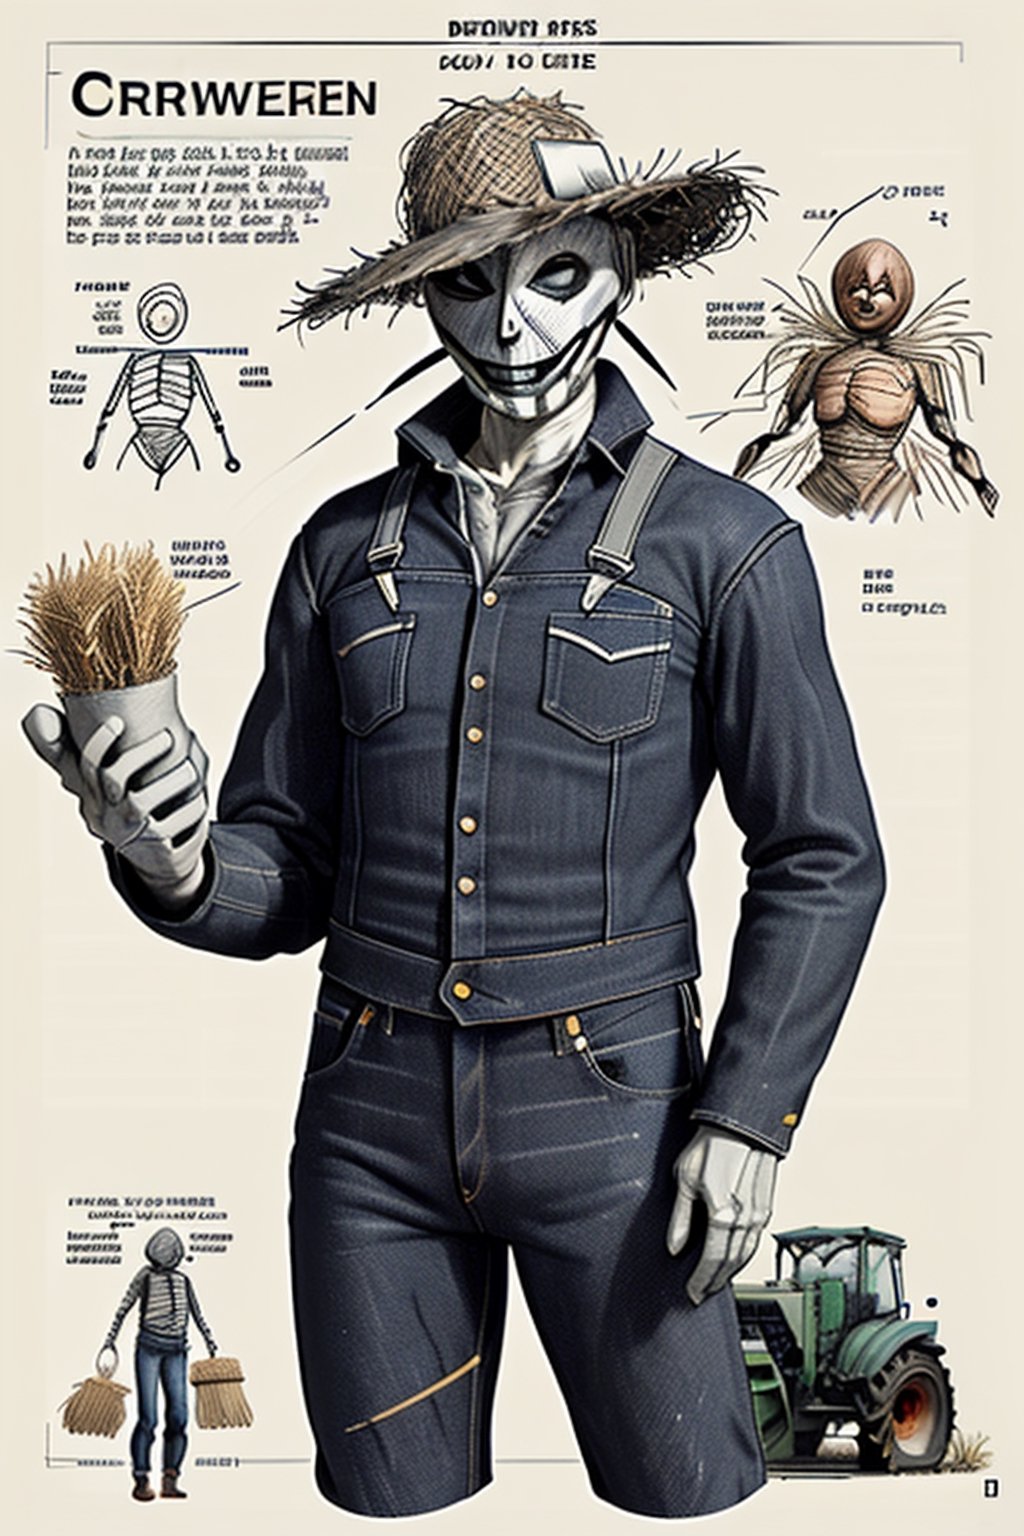 draft, outline, monochrome,  reference sheet, how to build a scarecrow with old jeans, old clothing, tractor and cornfield. Straw coming out of scarecrow